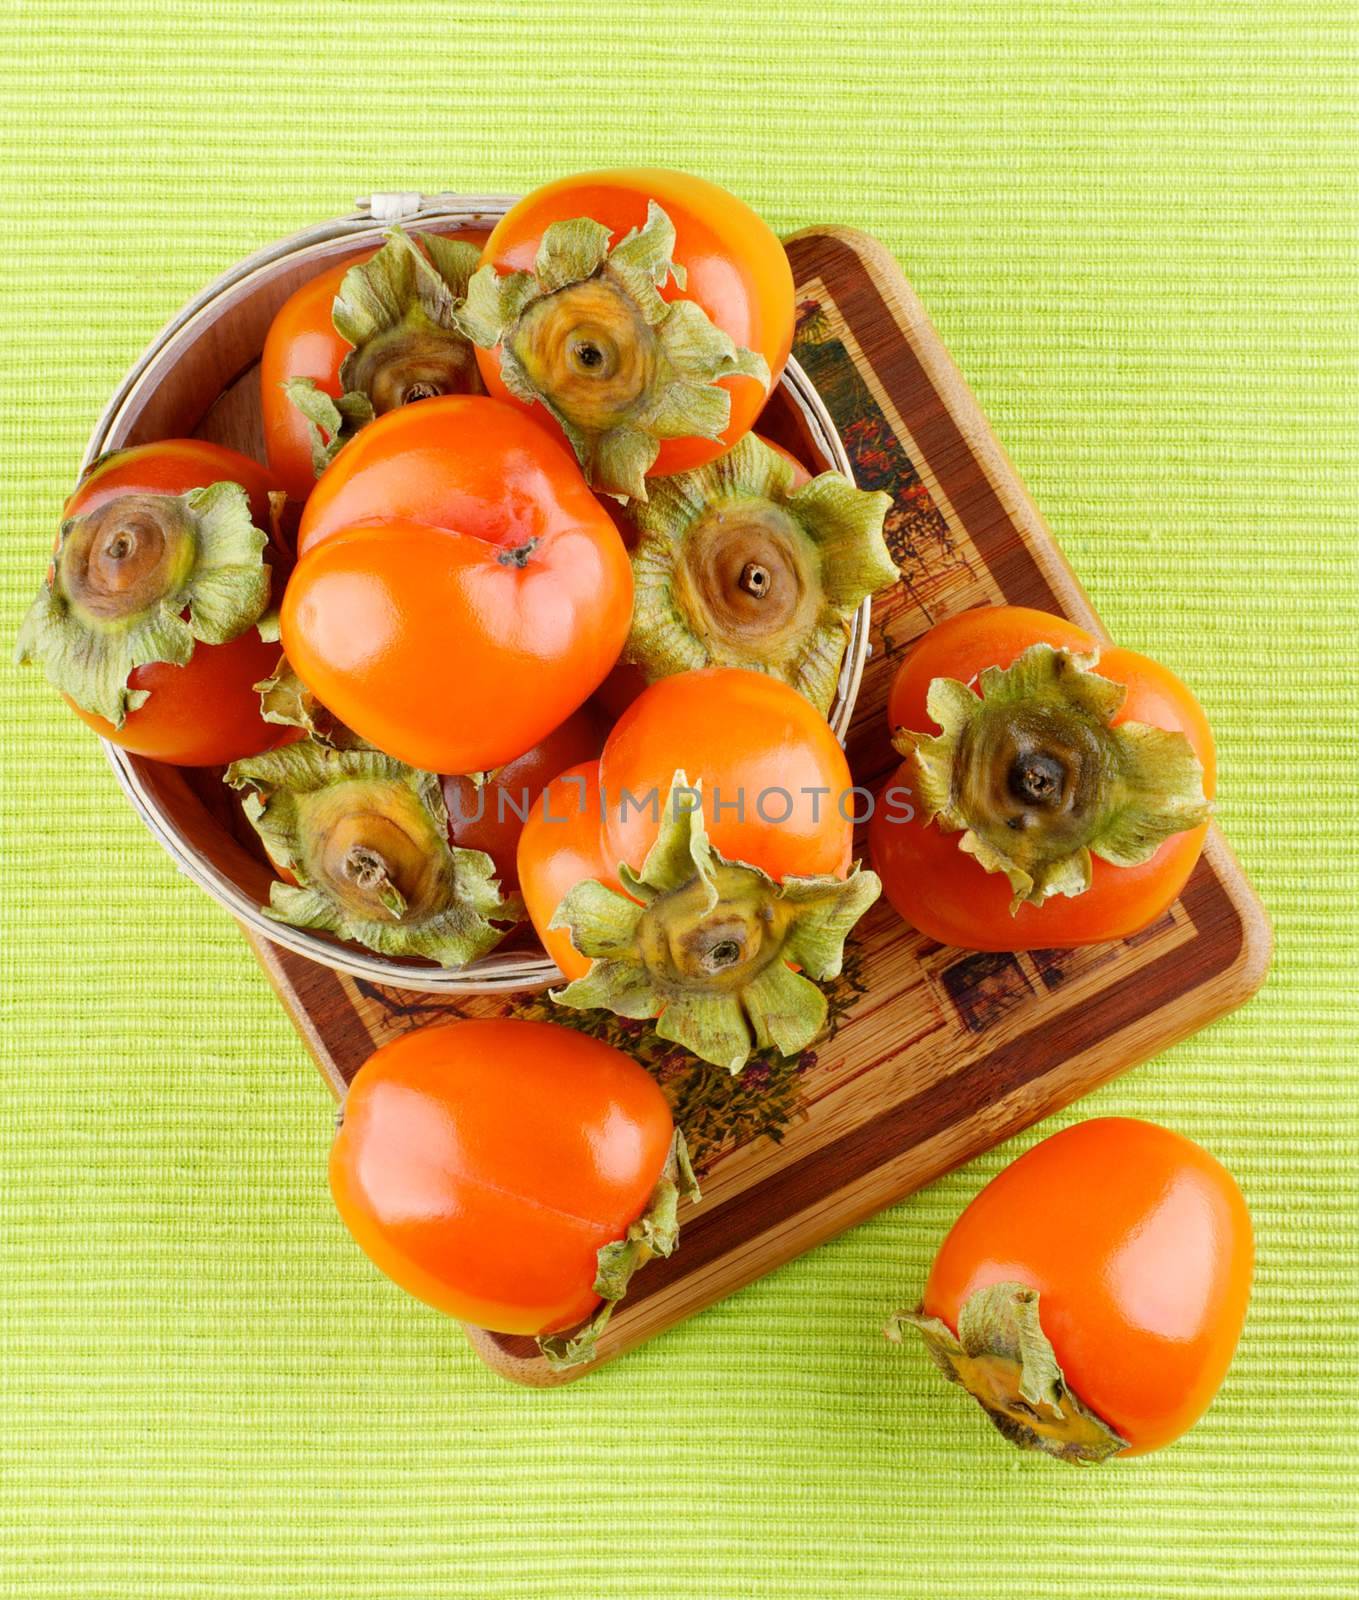 Heap of Delicious Raw Persimmon in Wooden Bowl closeup on Green Textile Napkin background. Top View